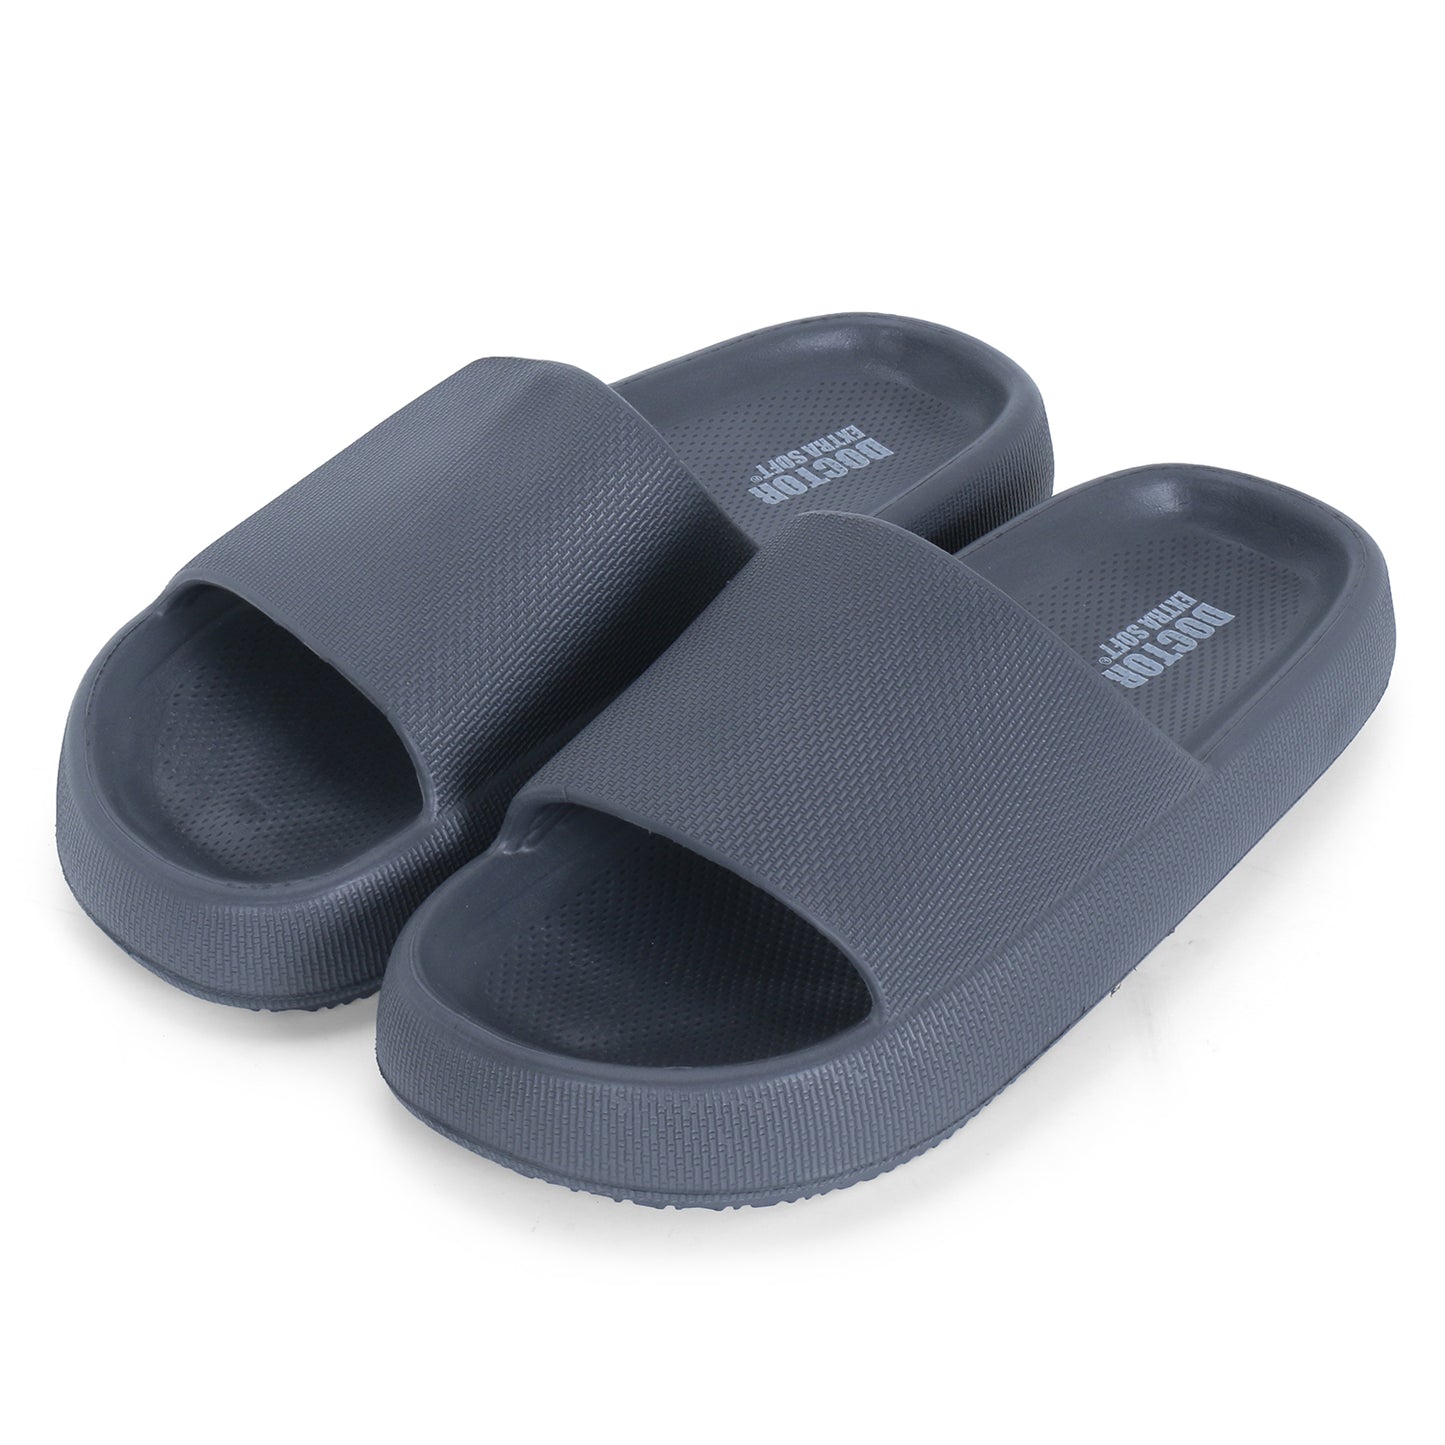 DOCTOR EXTRA SOFT D-504 Men's Classic Ultra Soft Sliders/Slippers with Cushion FootBed for Adult | Comfortable & Light Weight | Stylish & Anti-Skid | Waterproof & Everyday Flip Flops for Gents/Boy